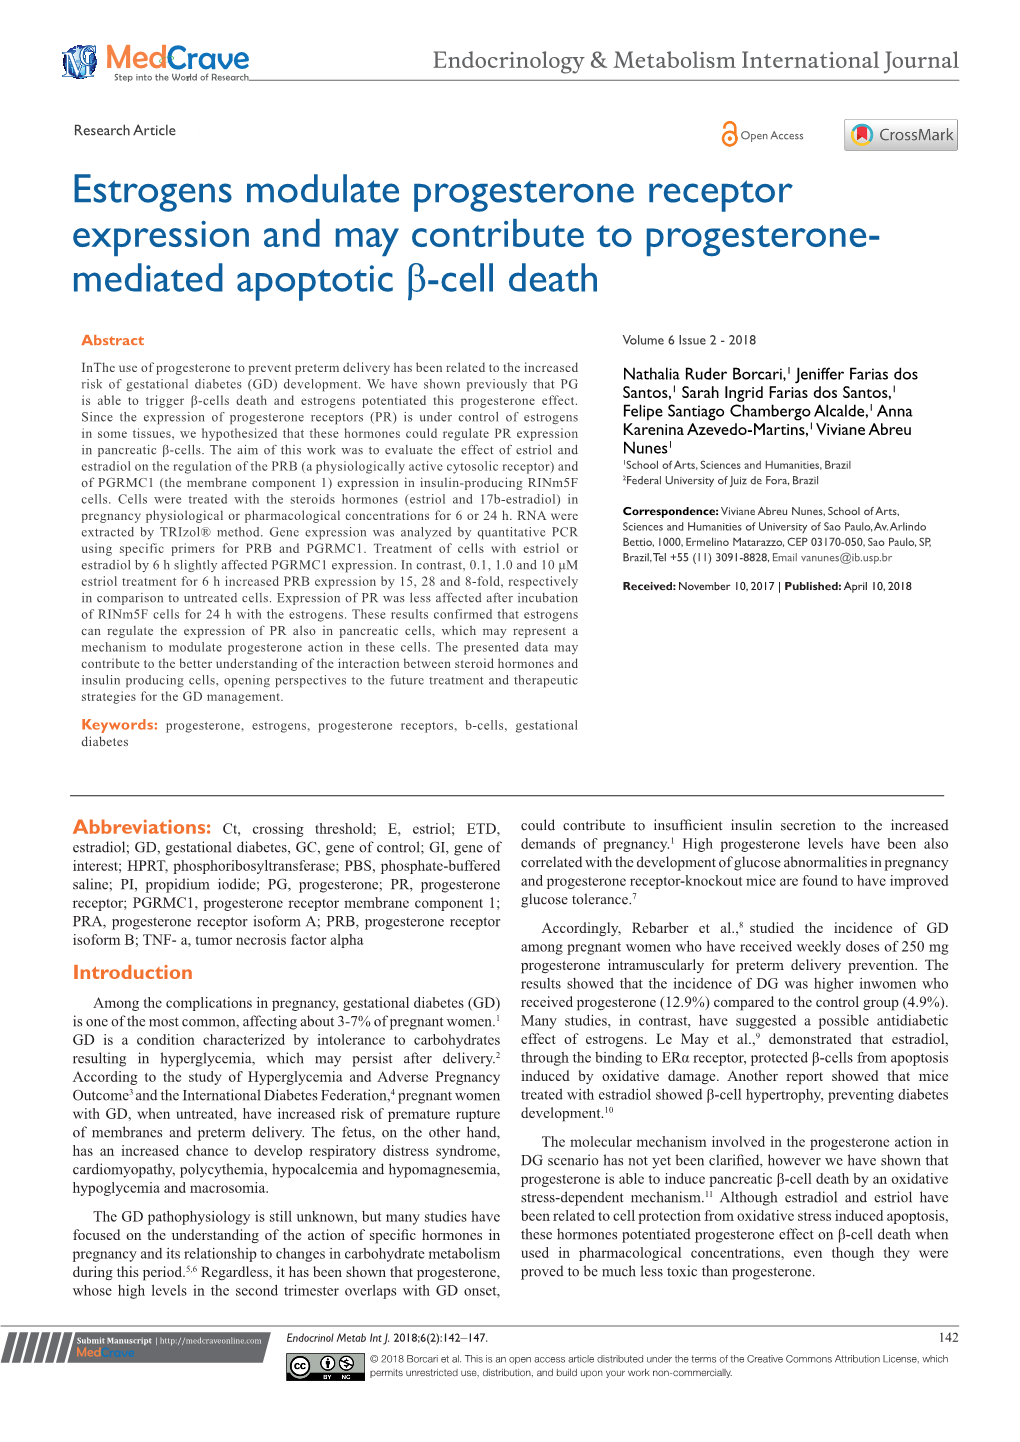 Estrogens Modulate Progesterone Receptor Expression and May Contribute to Progesterone- Mediated Apoptotic Β-Cell Death